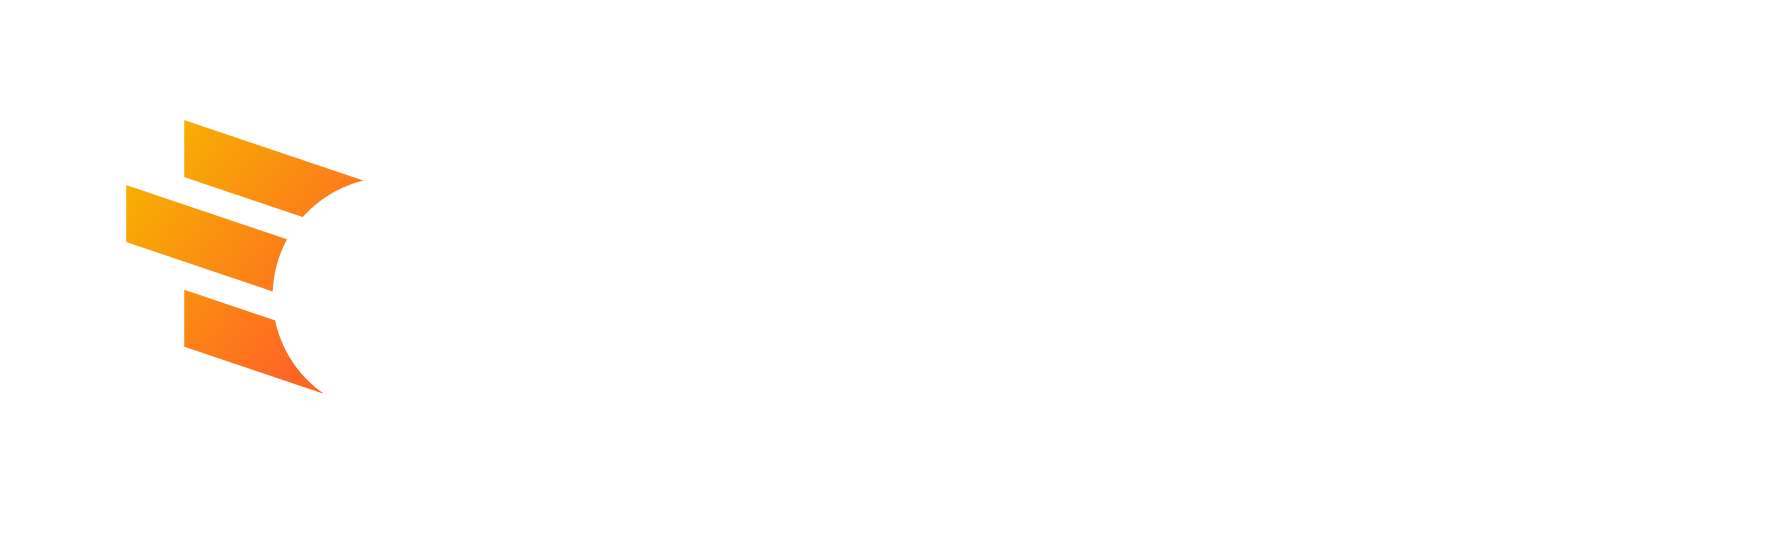 Catalyst - Without tagline - Logo-02